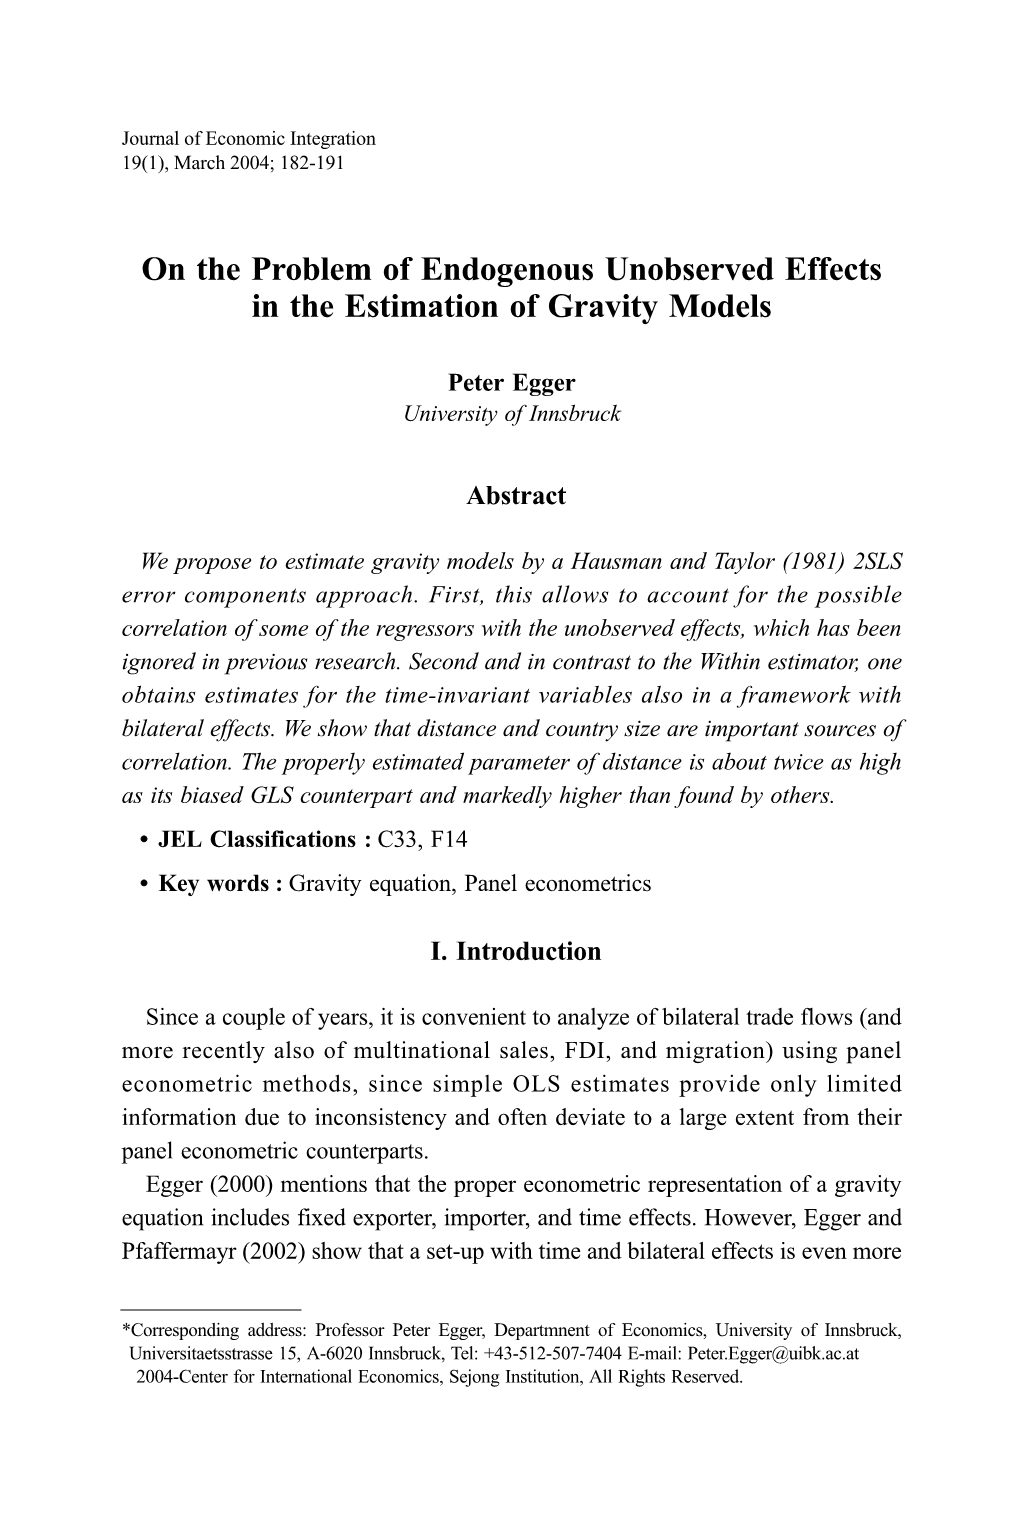 On the Problem of Endogenous Unobserved Effects in the Estimation of Gravity Models